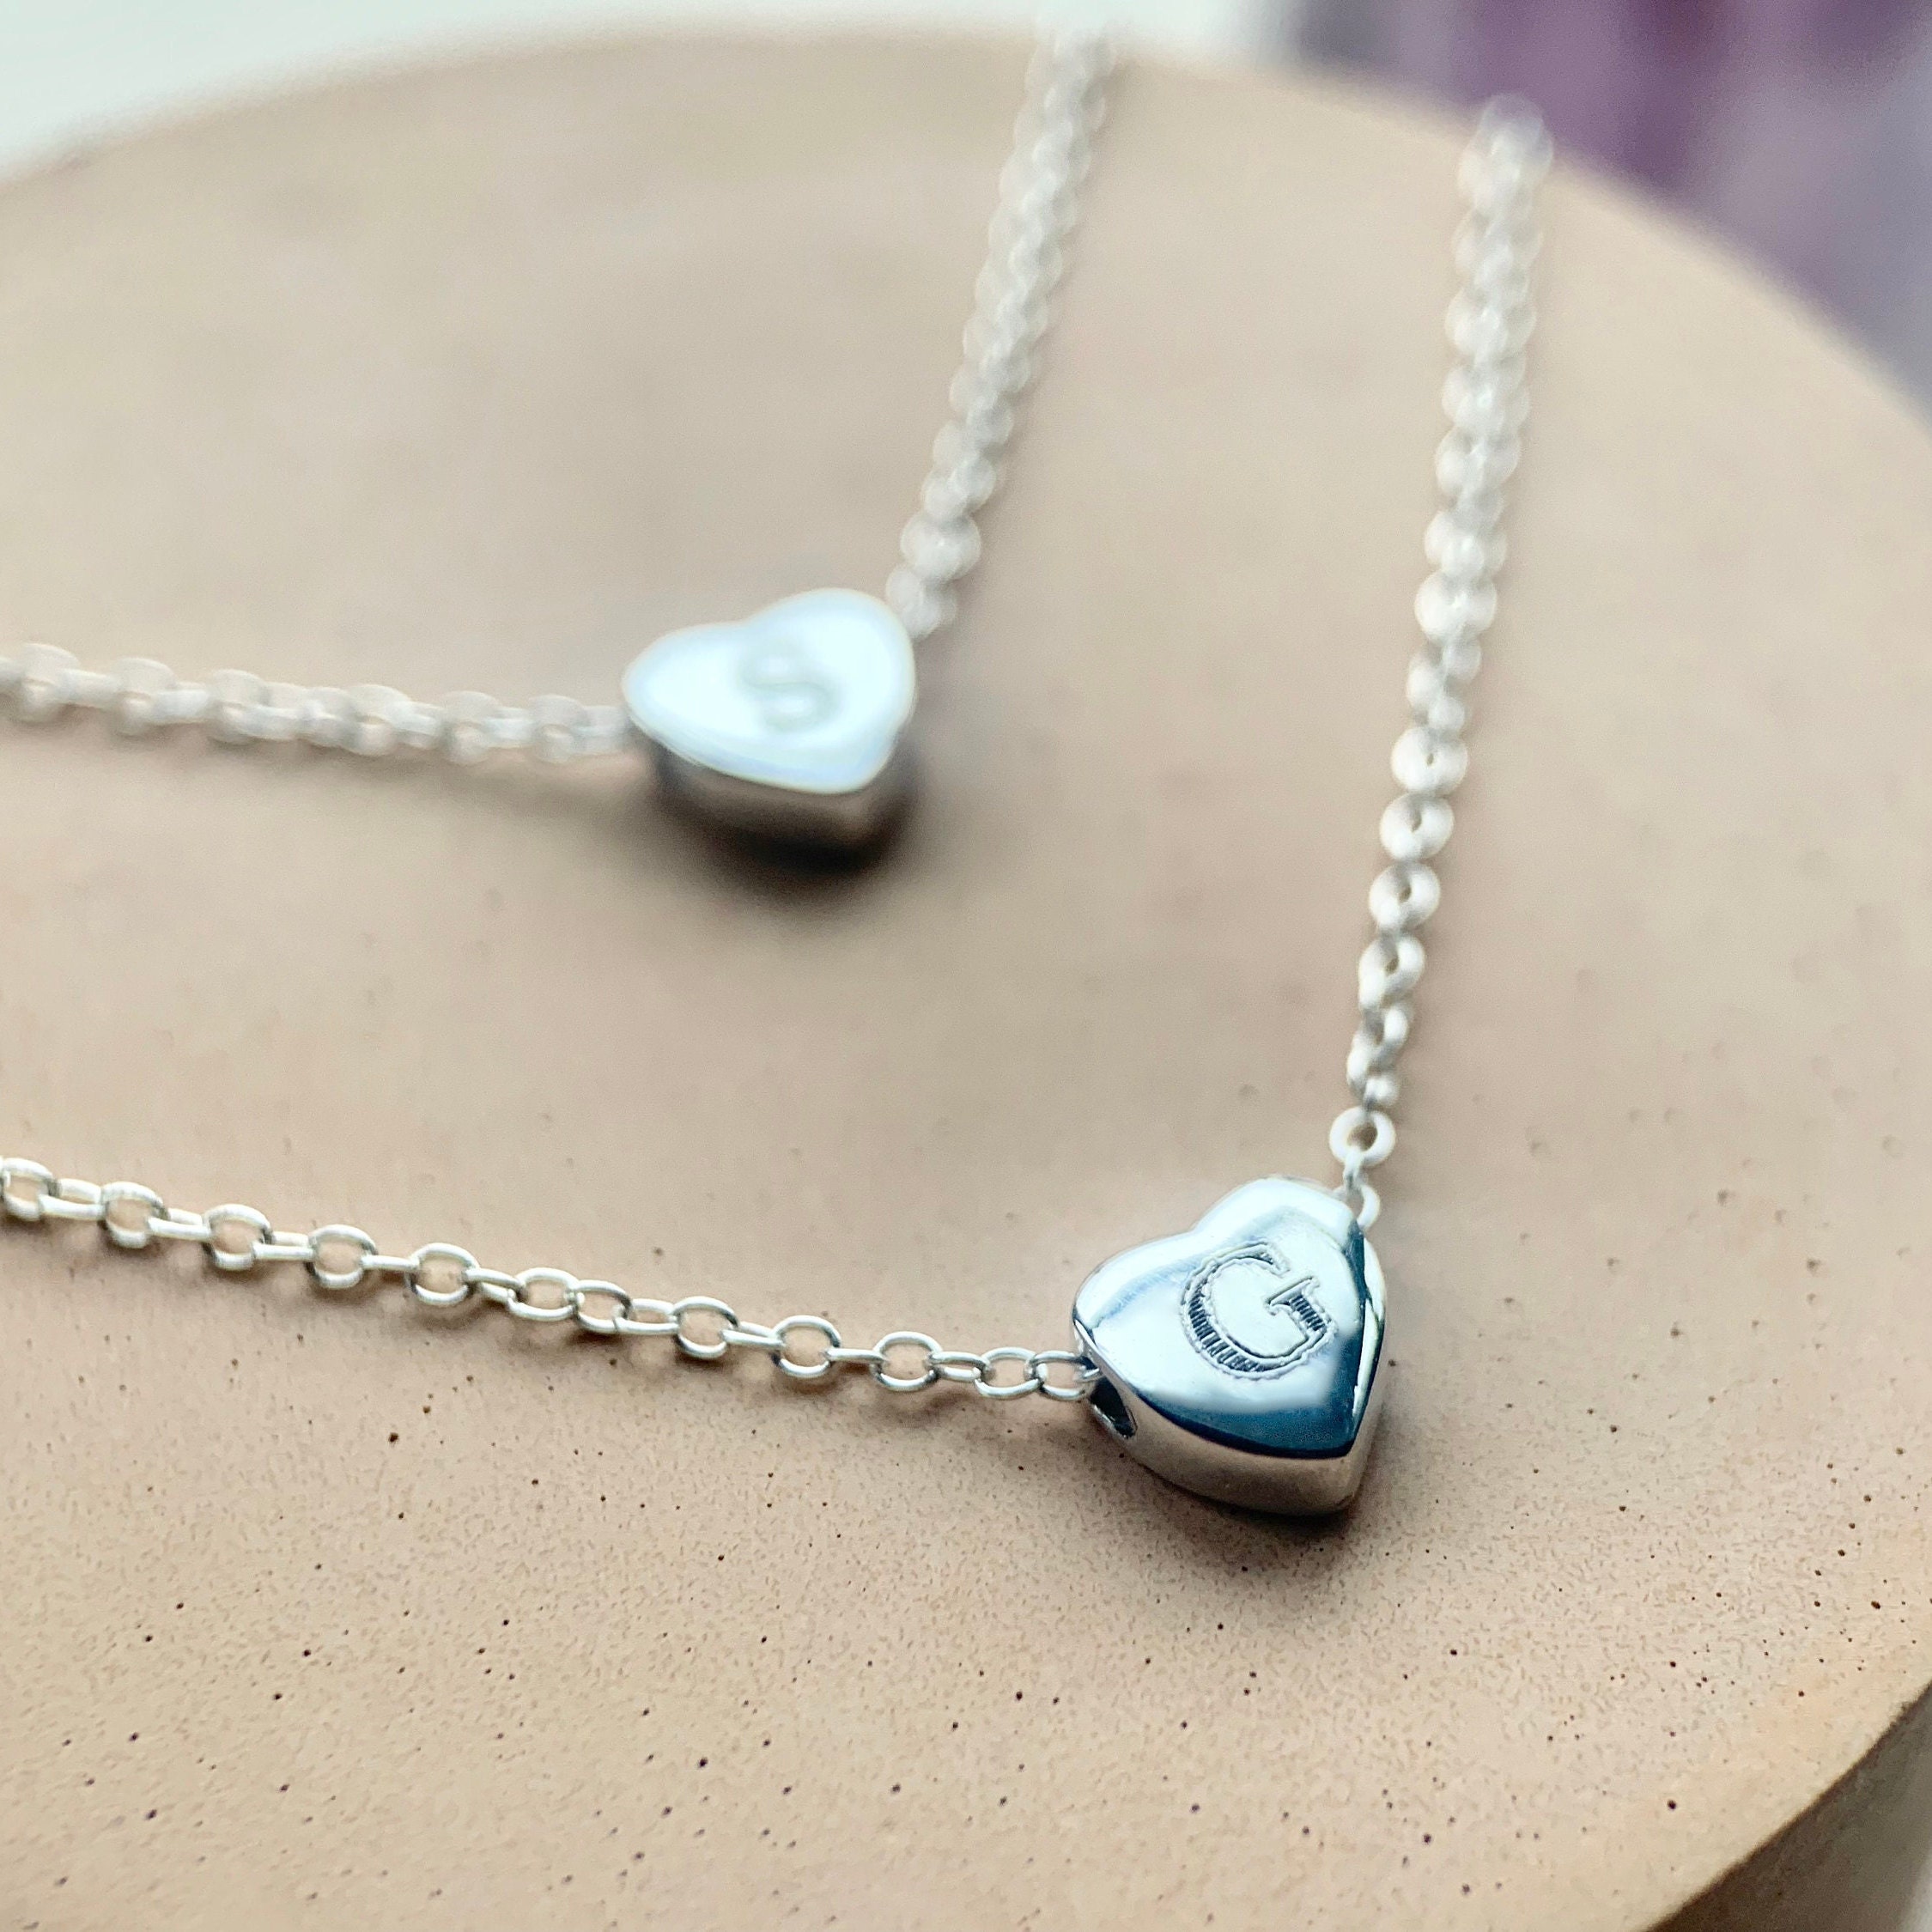 2023 New Necklace GirlsLove for Women and Heart Necklace Women Pendant  NecklaceFashion Accessory Girls Locket Necklaces Ages 5-7 (Silver, One Size)